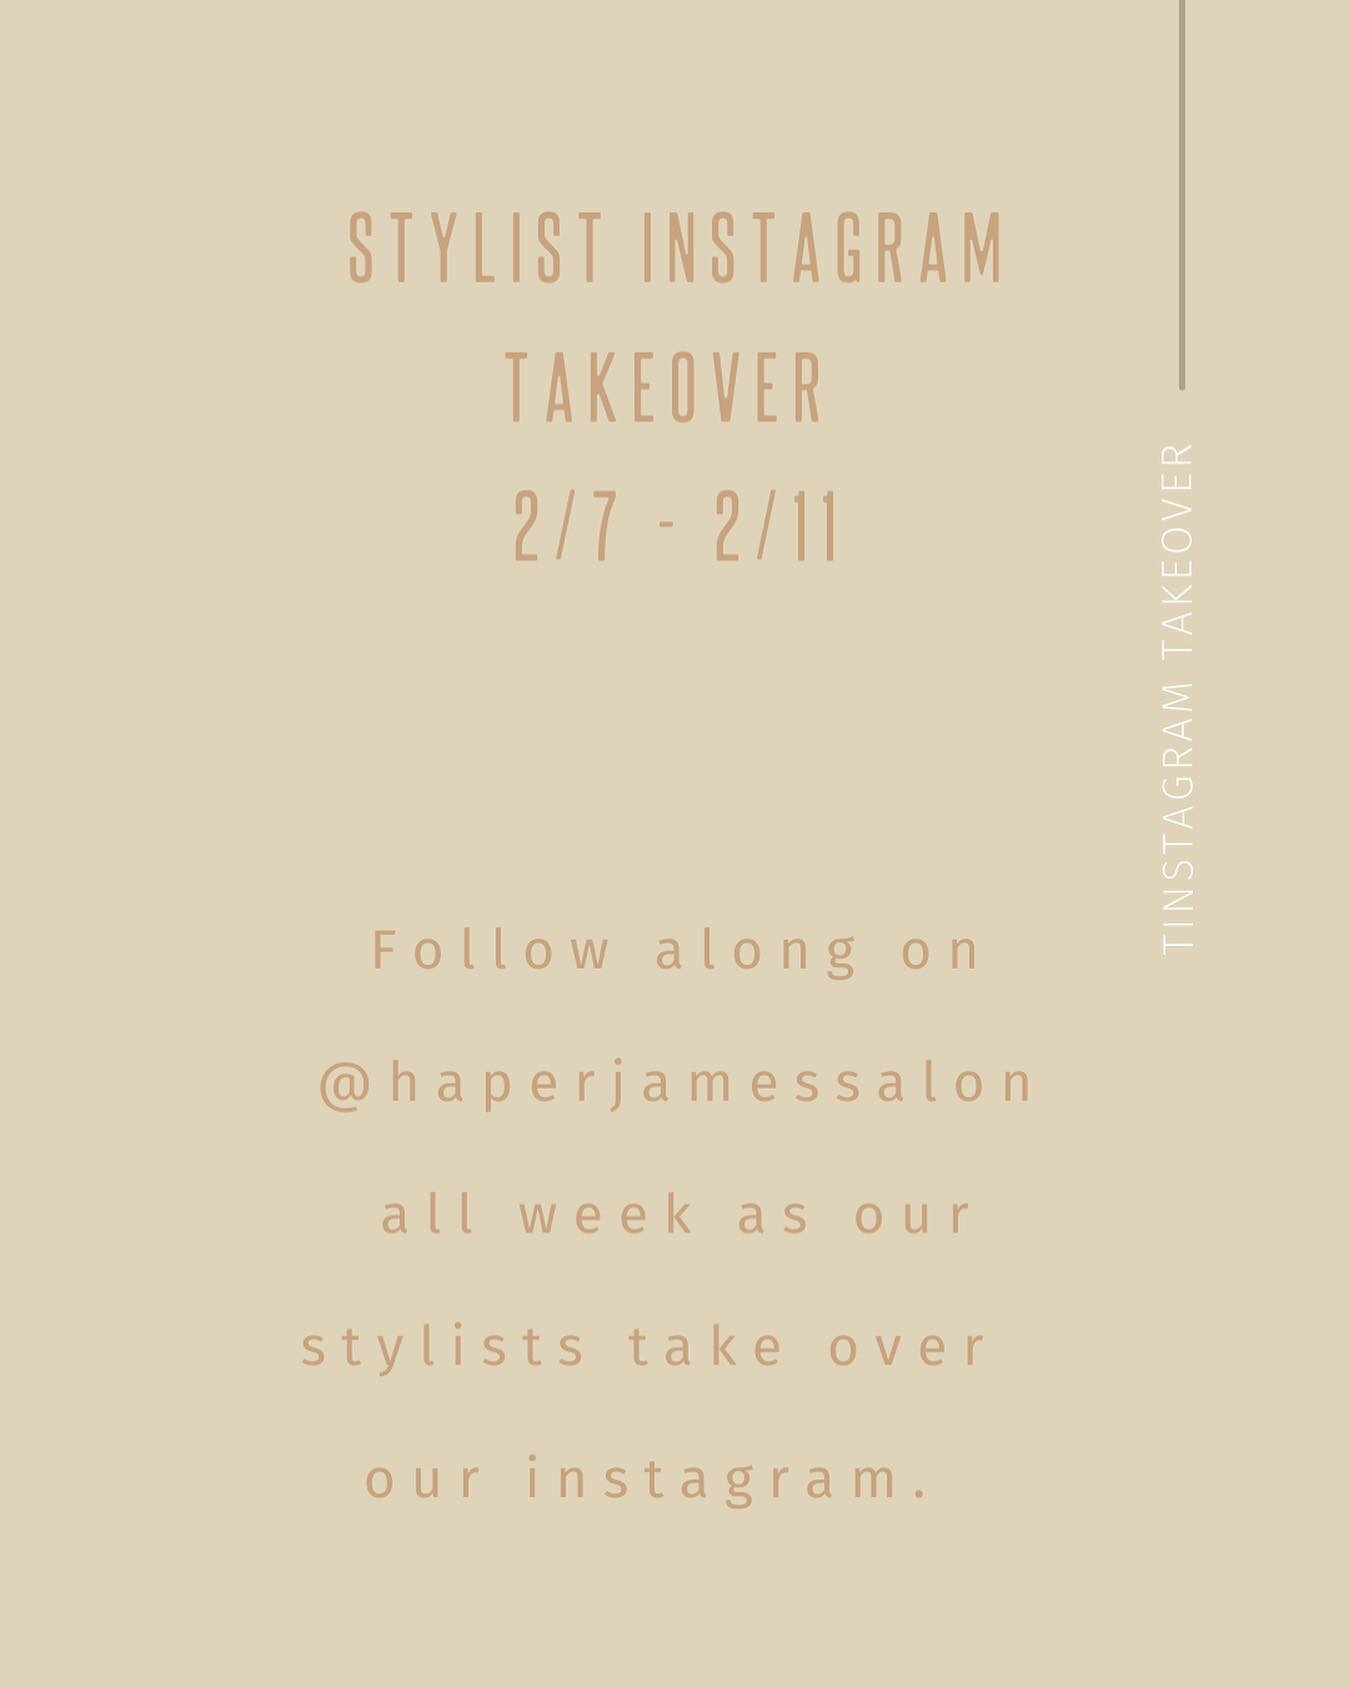 Follow us this week for our stylist takeovers!